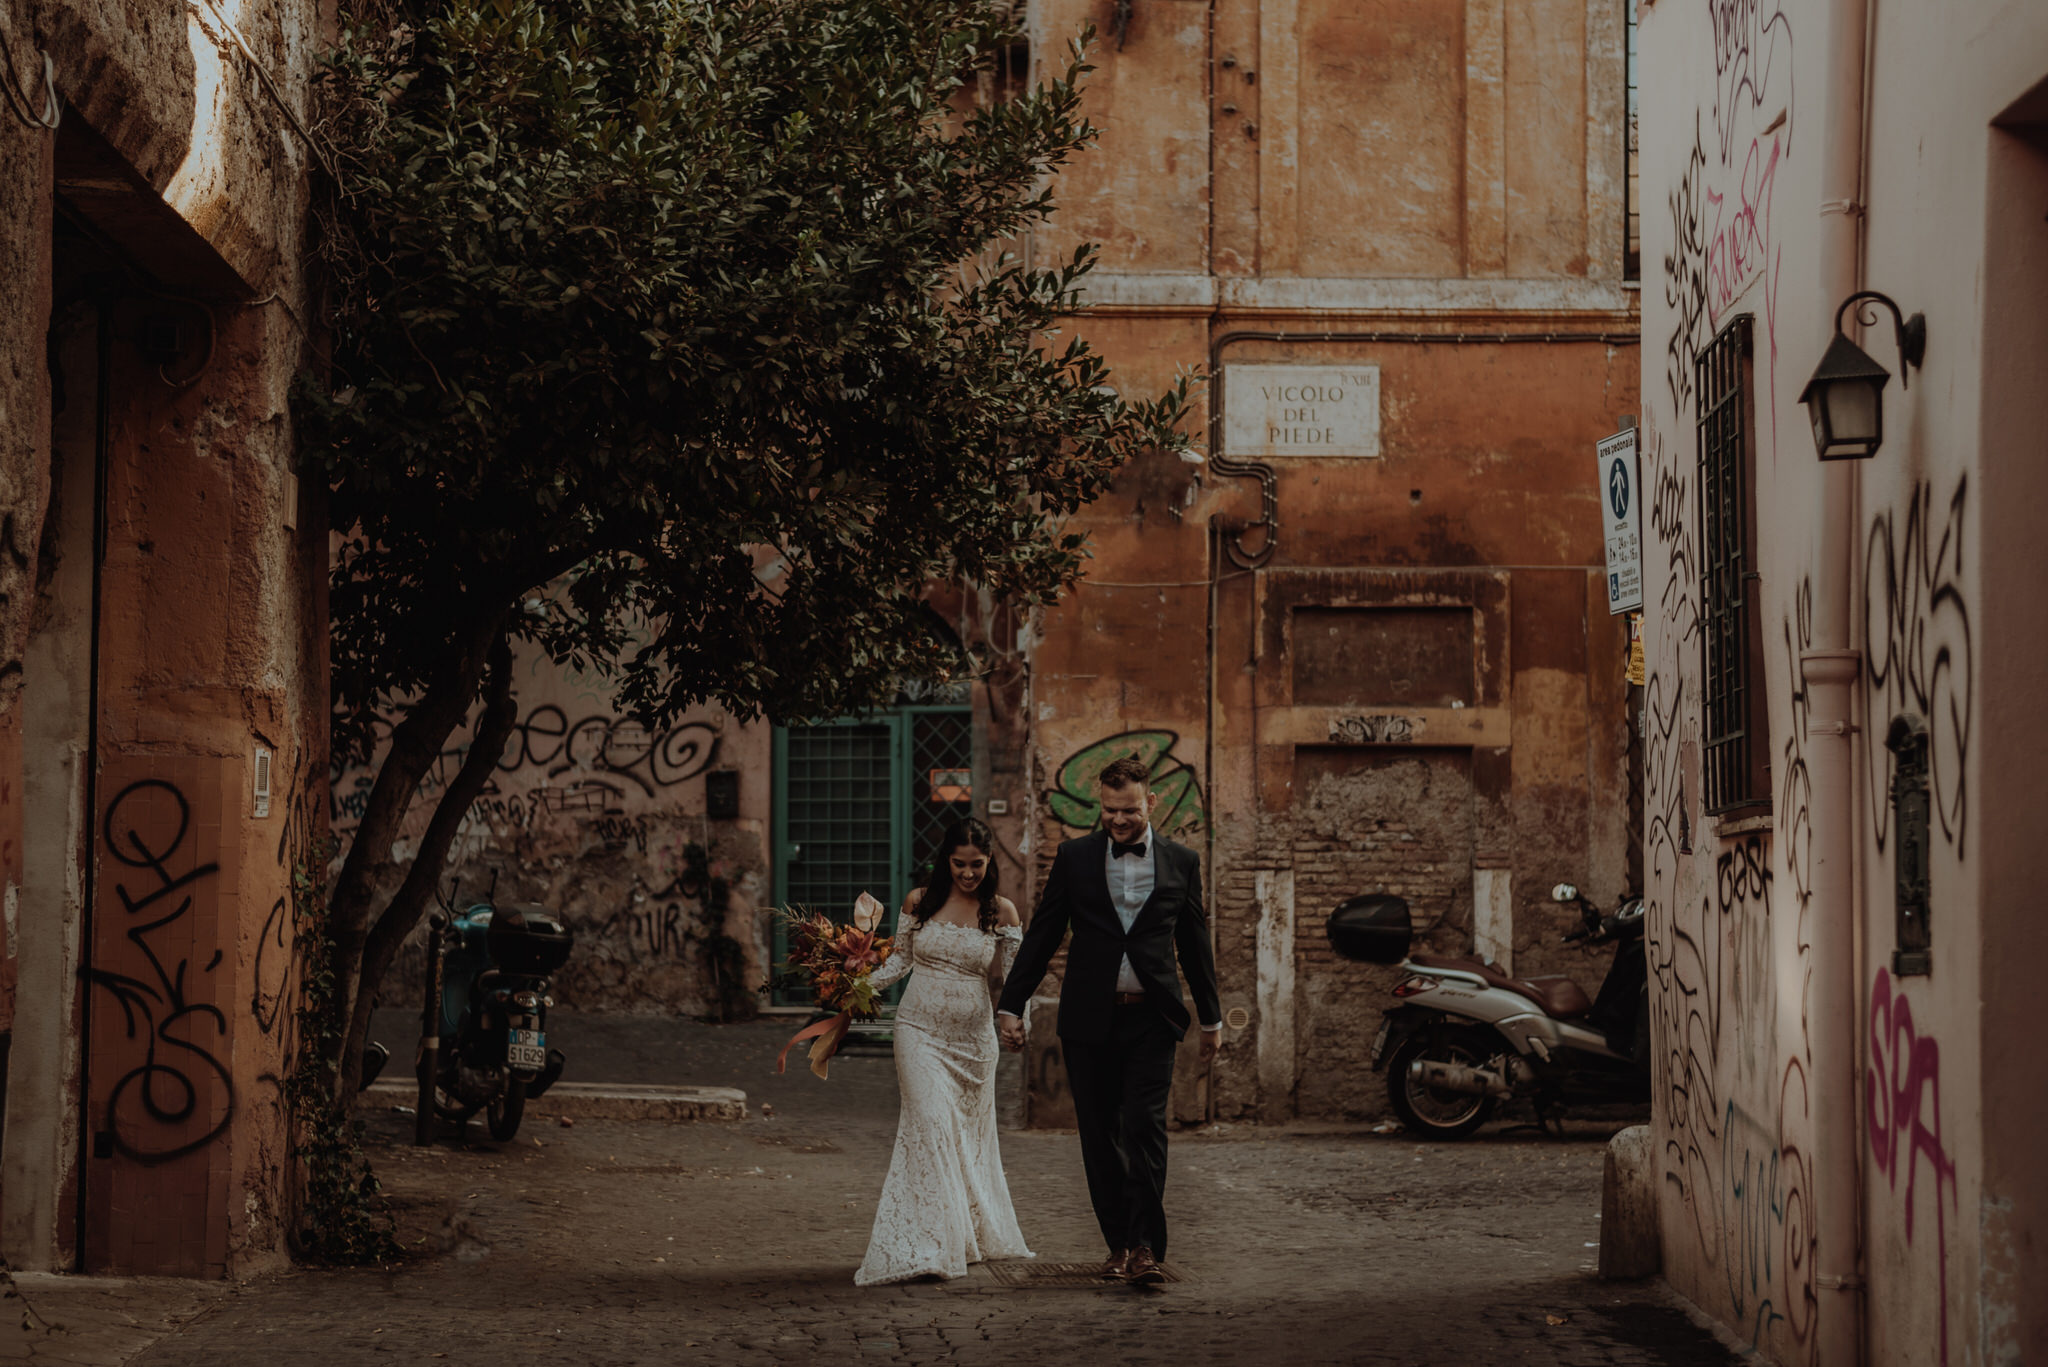 Honeymoon session in Trastevere, the real heart of the city